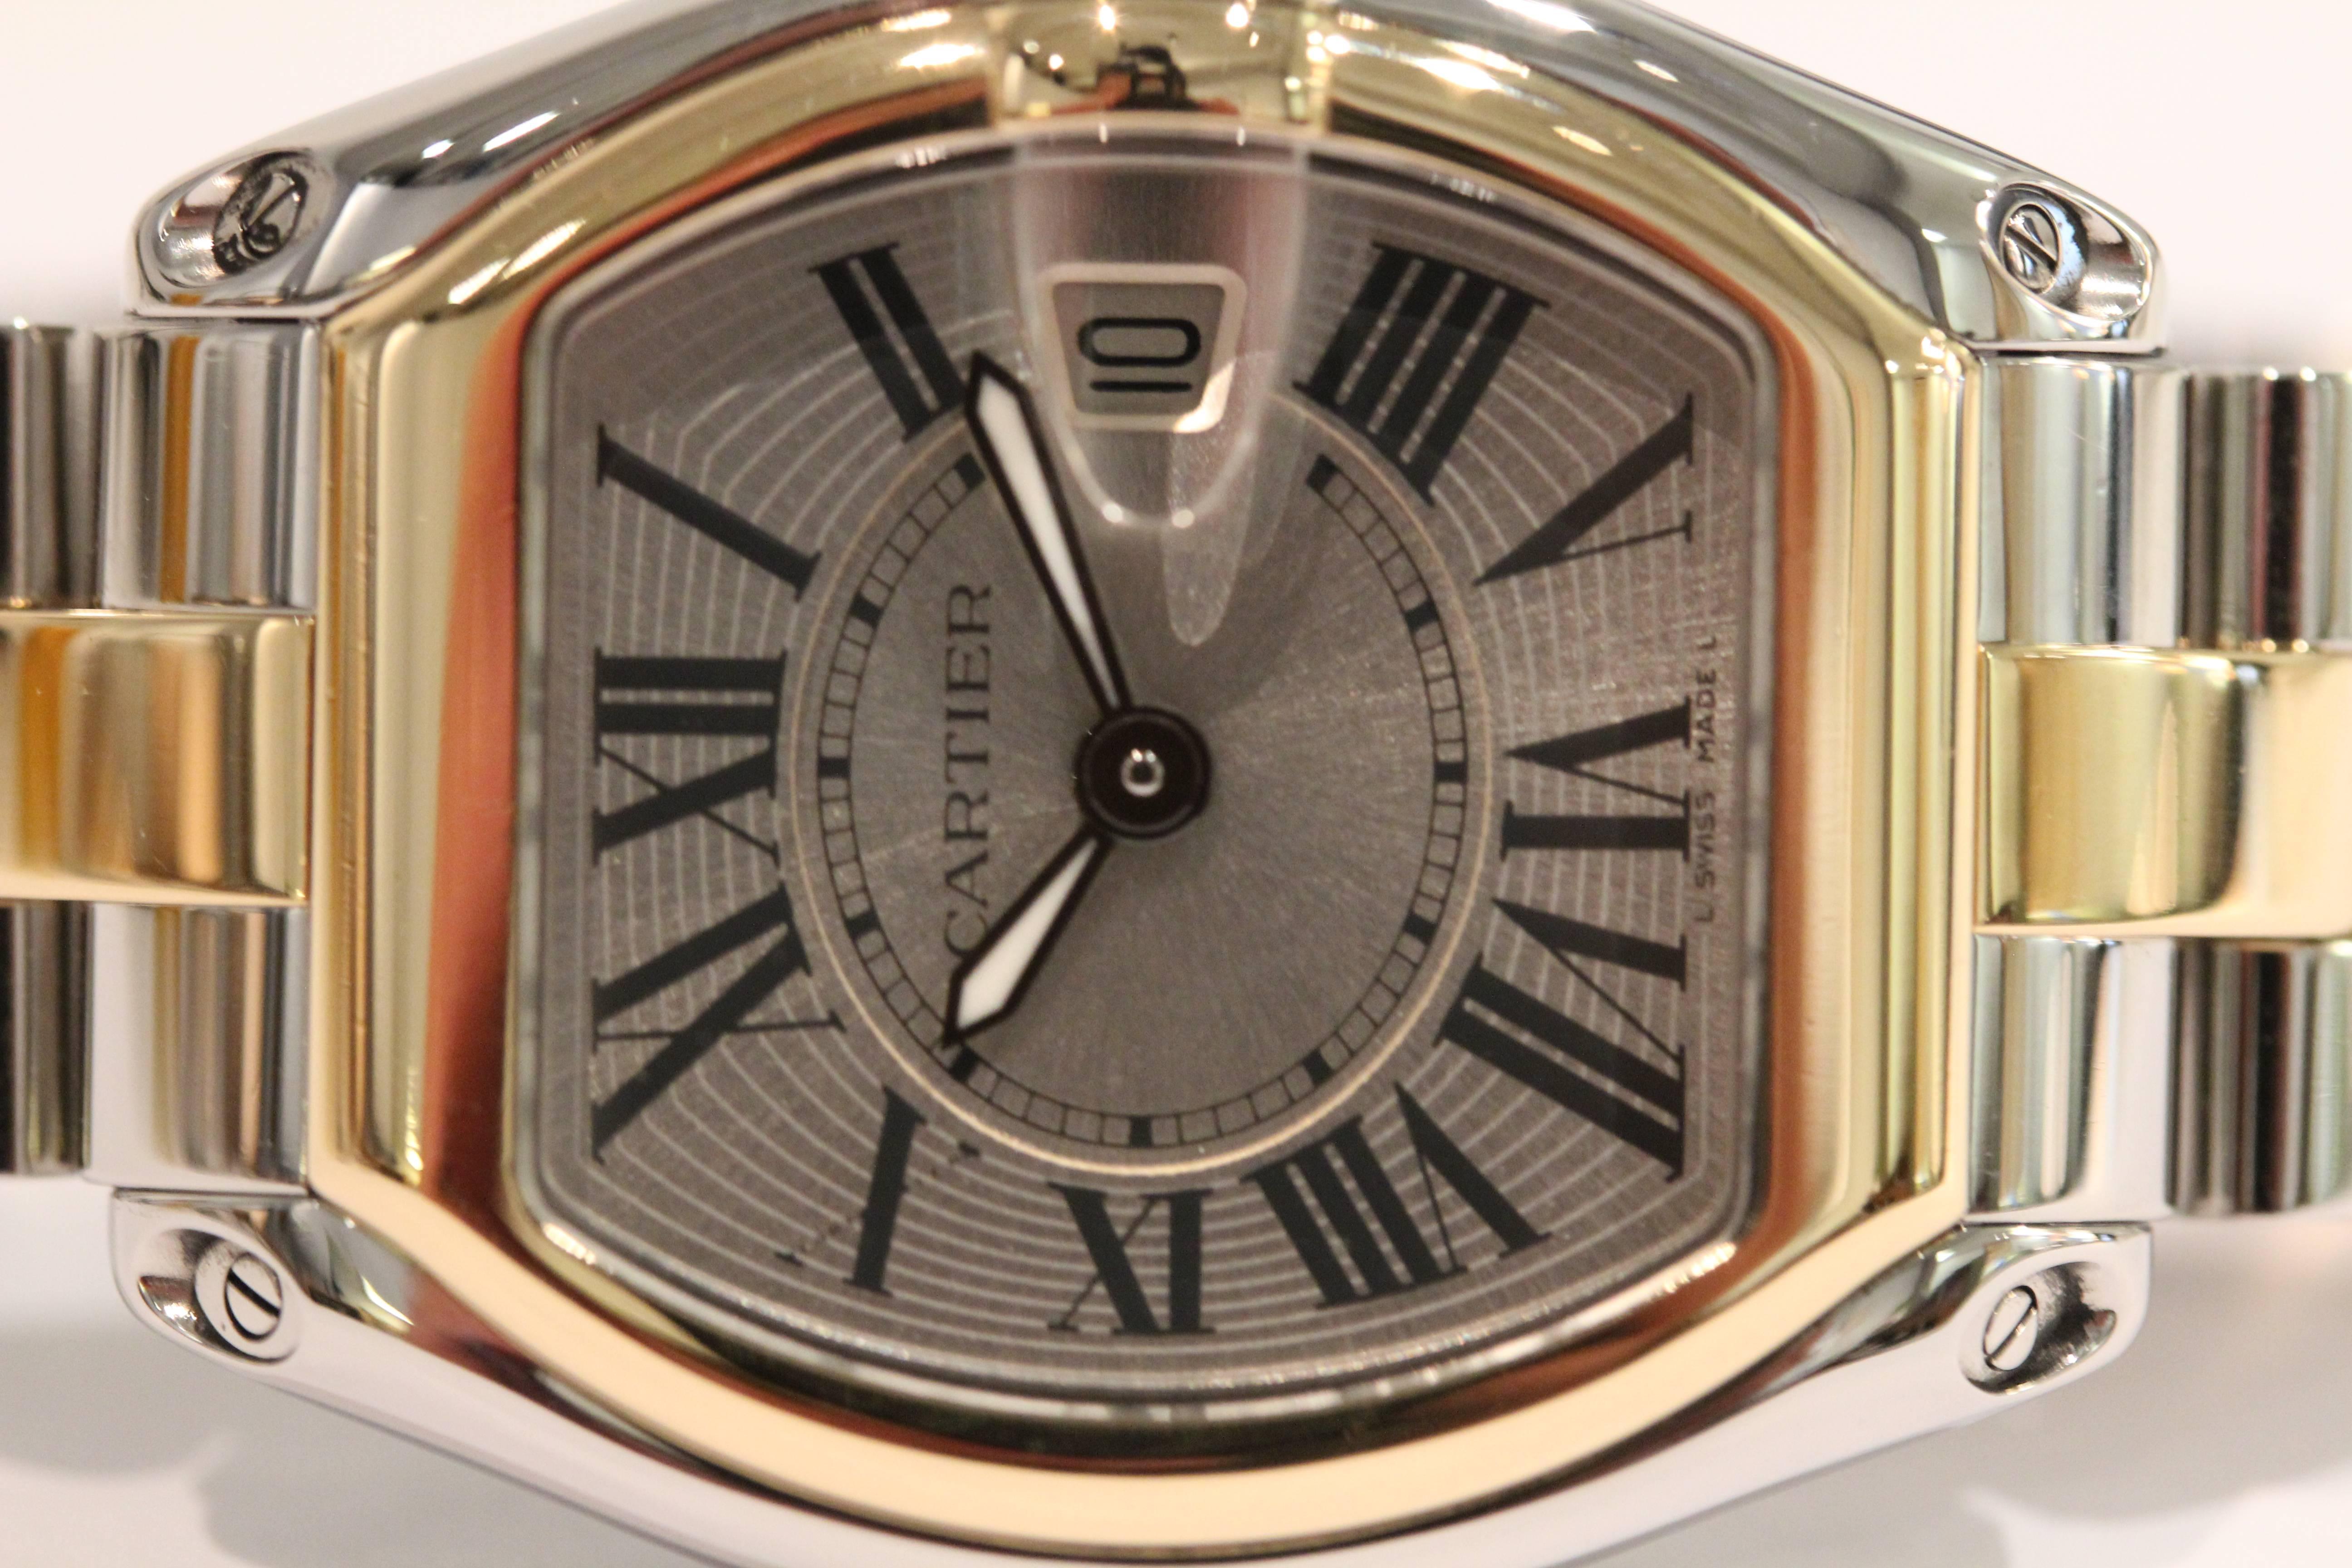 Cartier stainless steel and 18k yellow gold Roadster with silvered Roman
numeral dial. The watch has a quartz movement. Serial #615060MX 2675 with
Box and leather deployment strap.